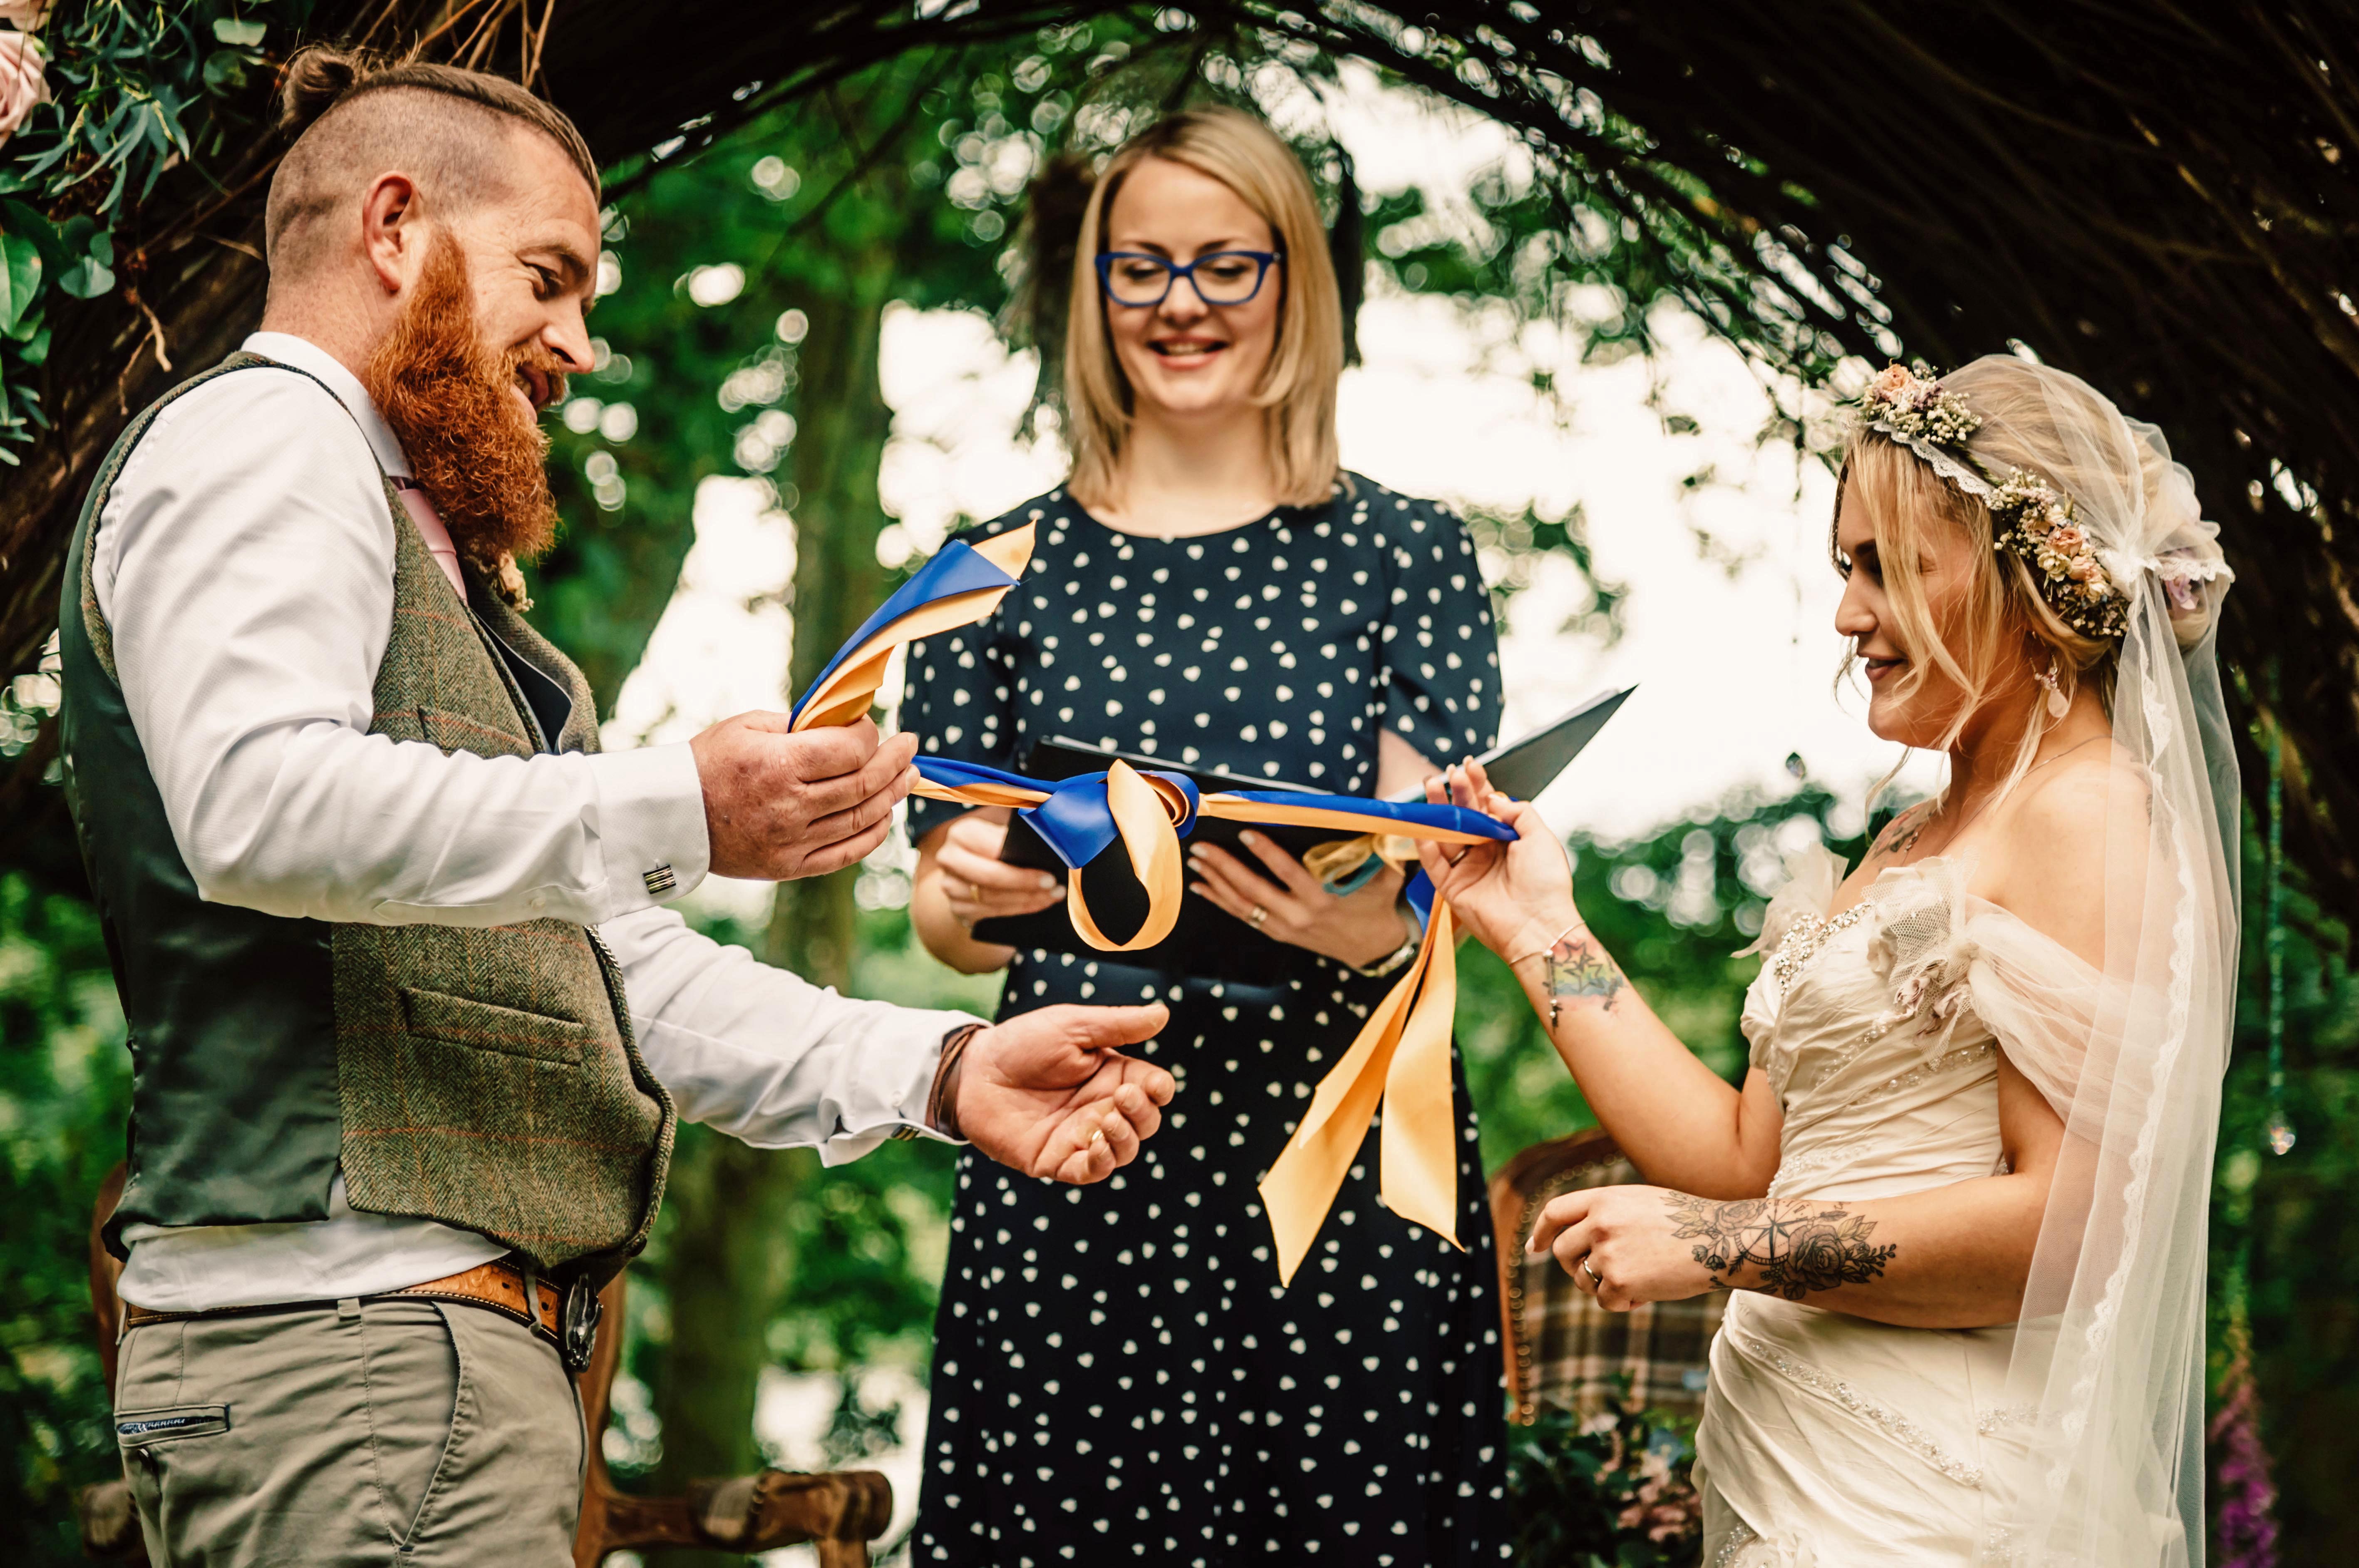 Tying the knot in a humanist wedding ceremony – Humanists UK